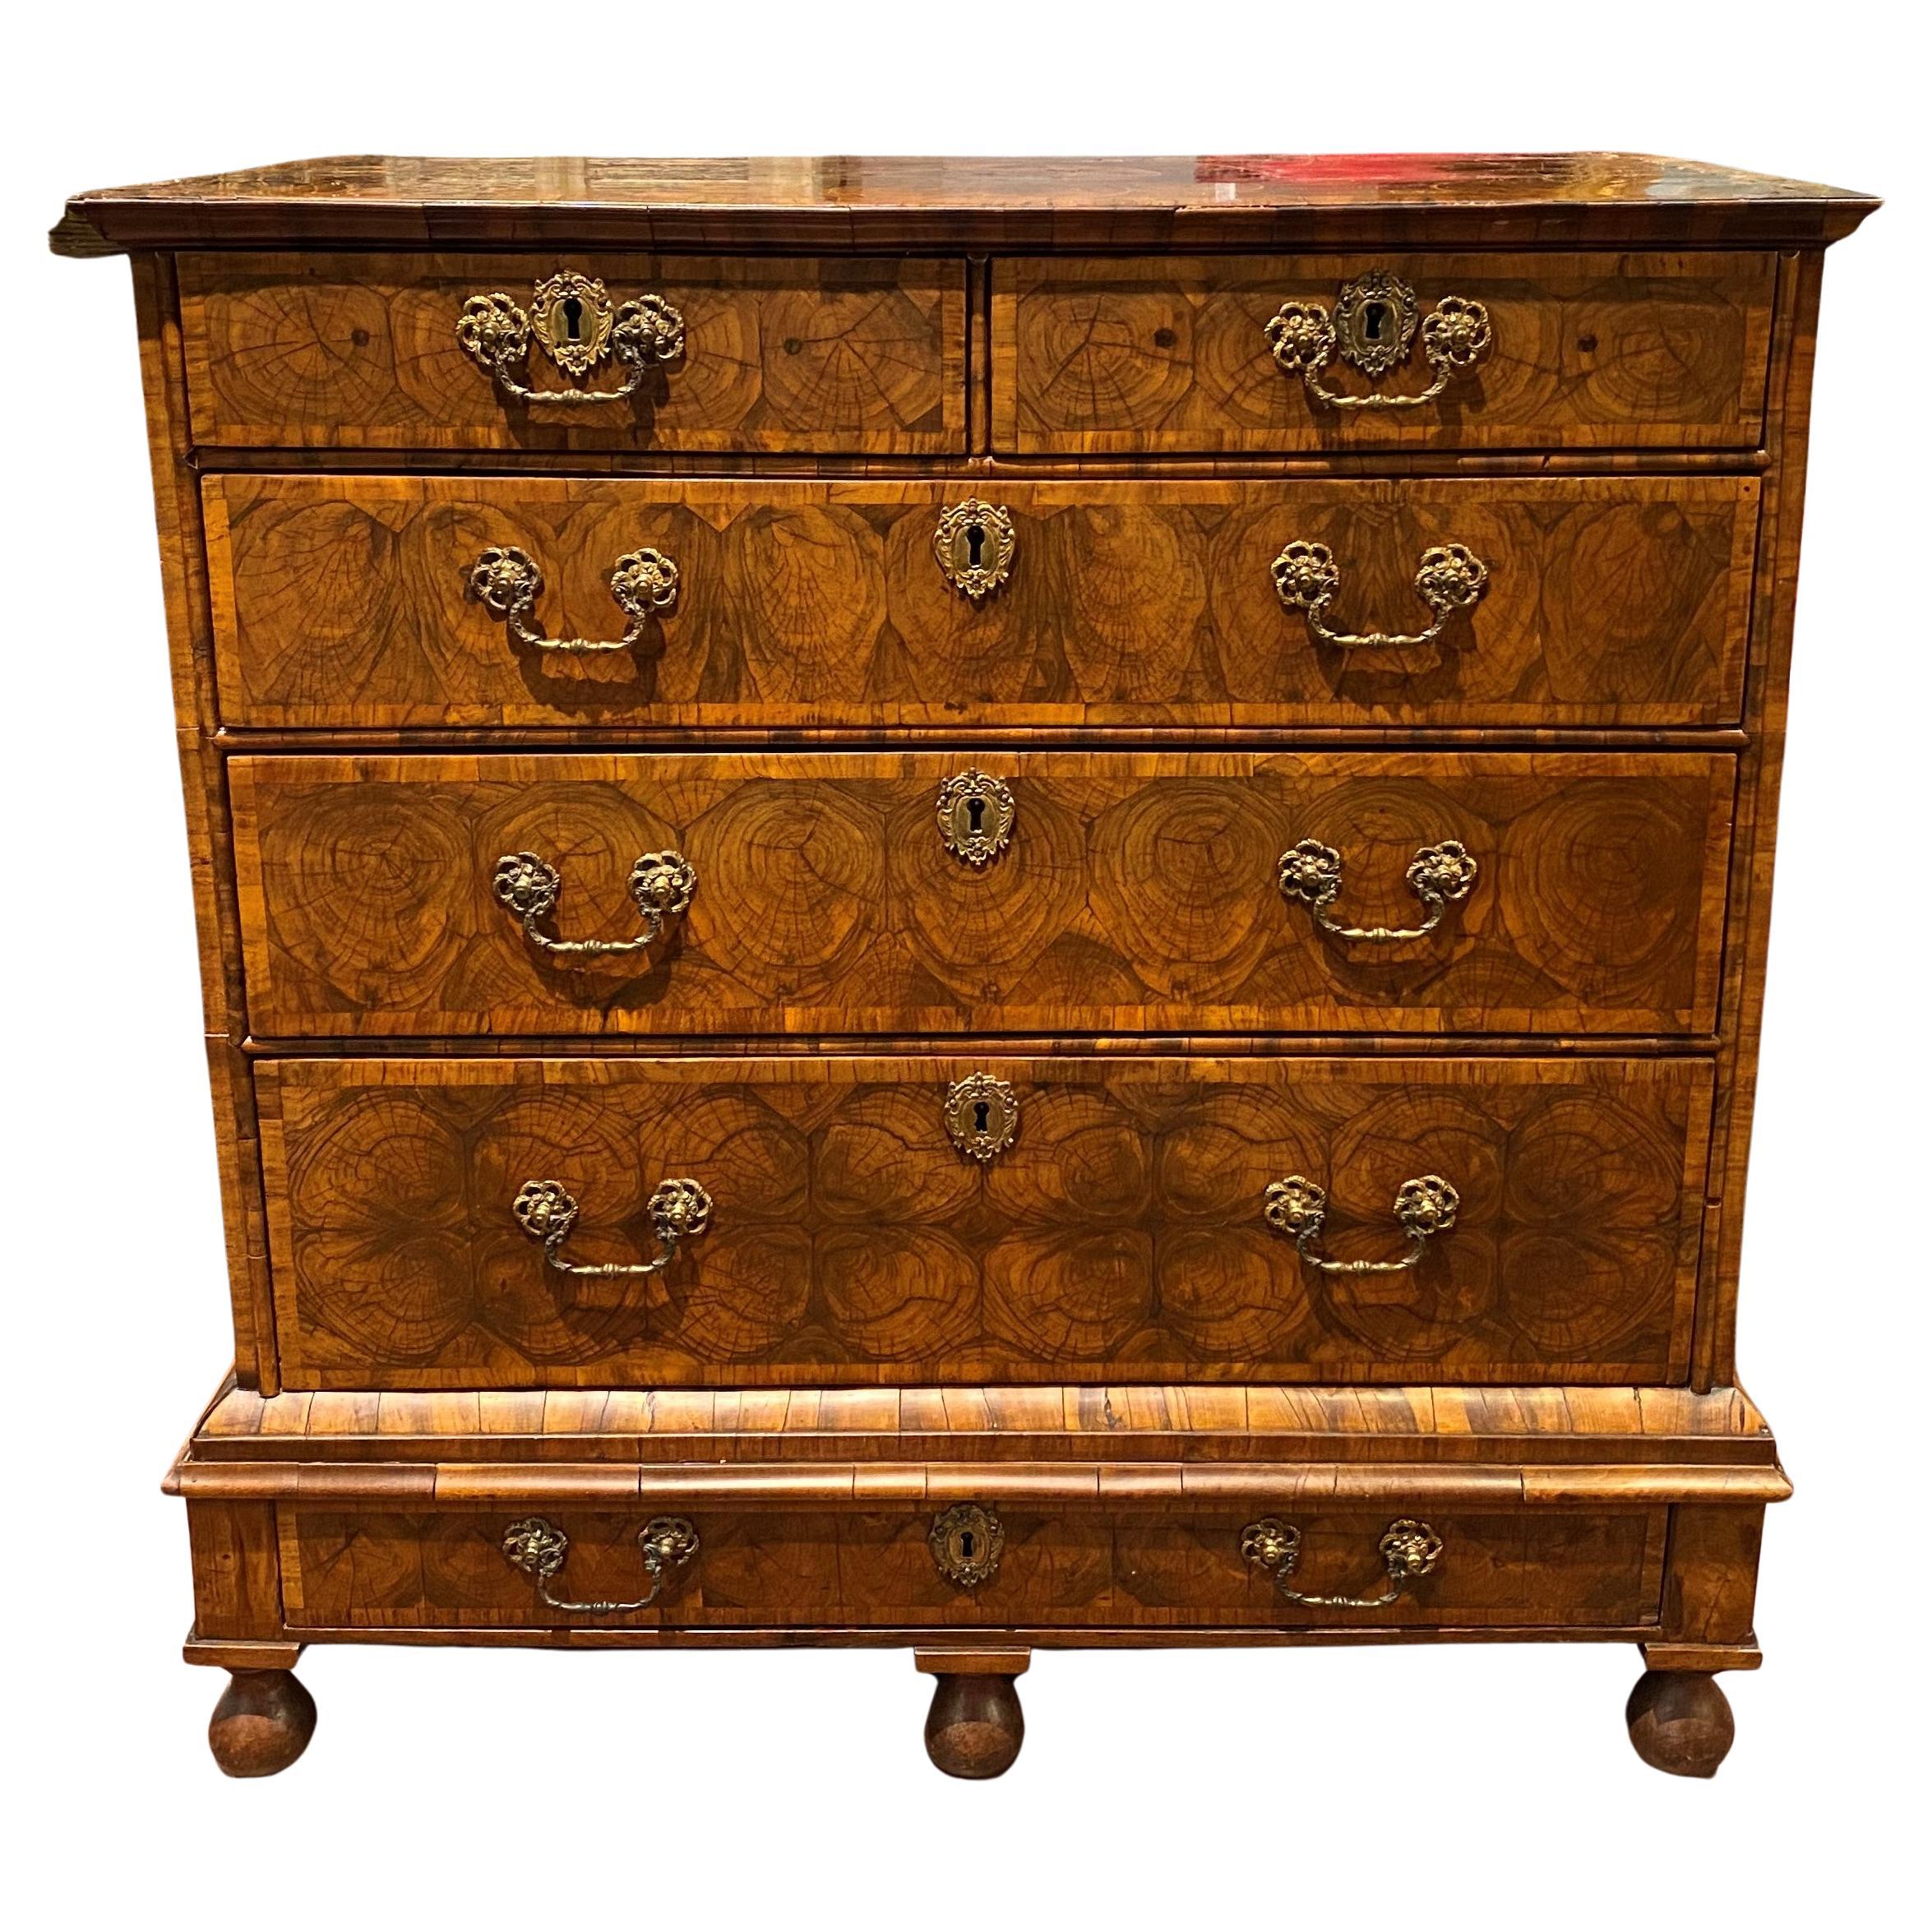 18th Century English Endgrain Walnut Veneer Chest of Drawers from Minley Manor For Sale